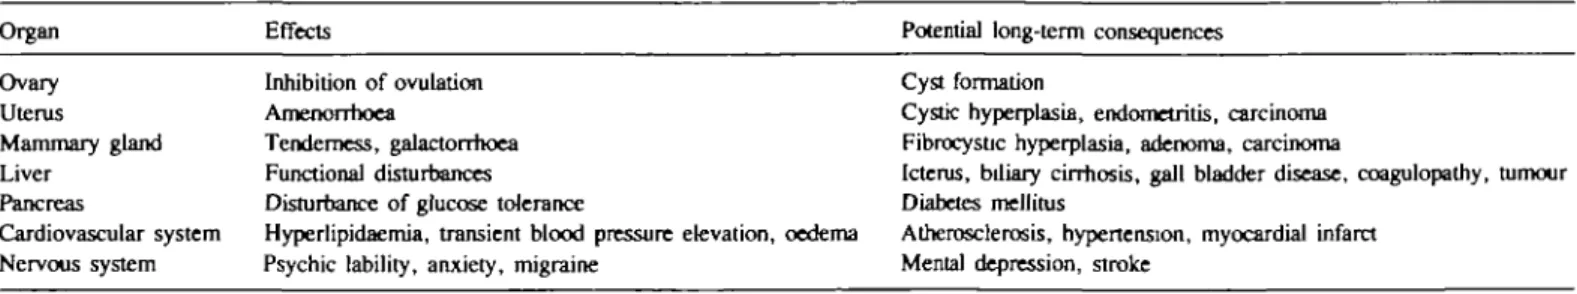 Table I. Selected effects of contraceptive steroids and potential consequences of long-term use